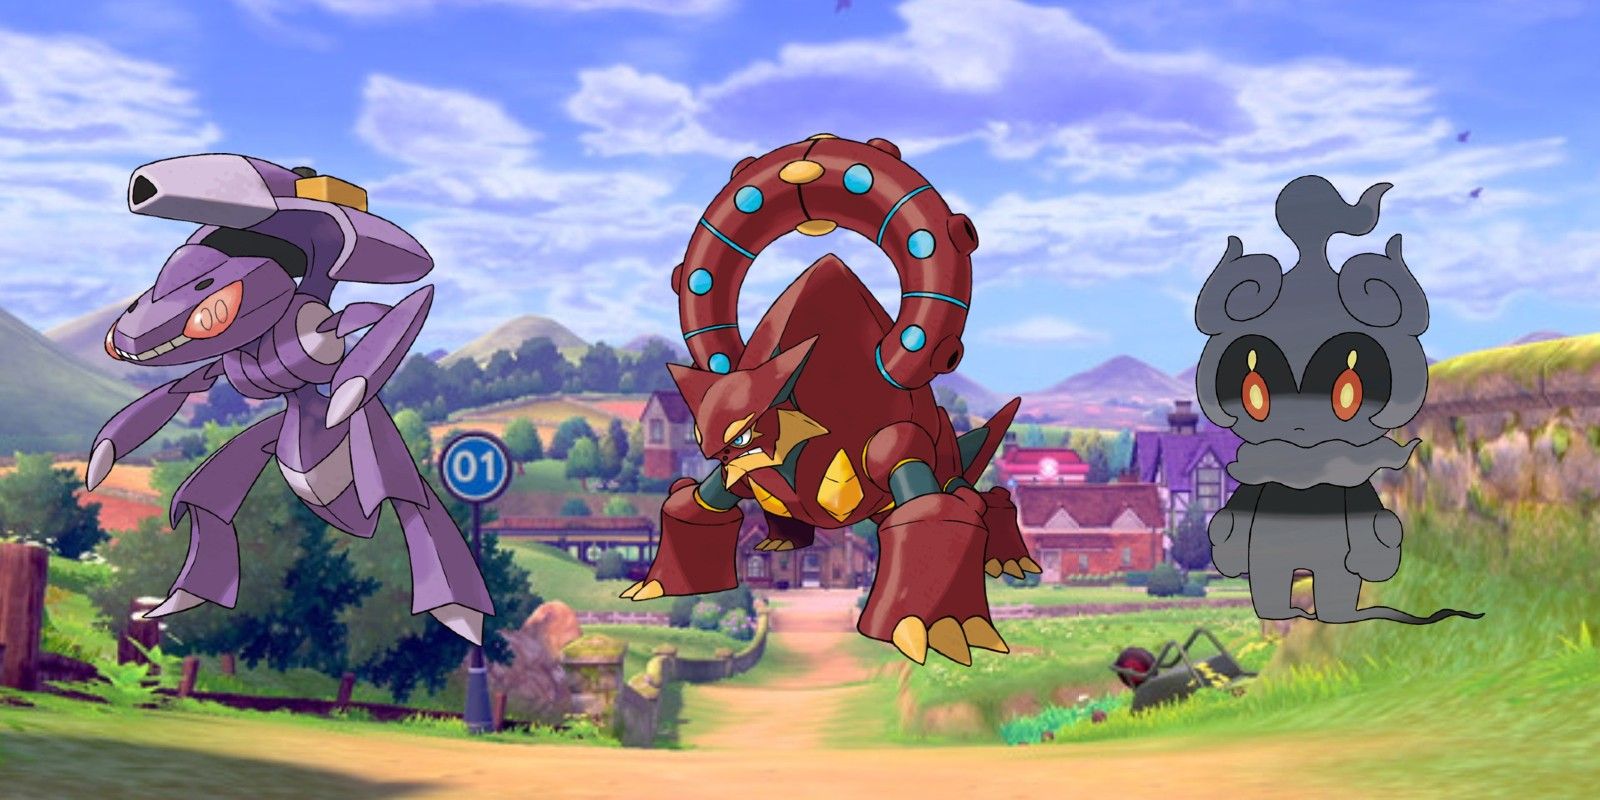 The Mythical Pokémon Genesect, Volcanion, and Marshadow, against a backdrop from Pokémon Sword & Shield.